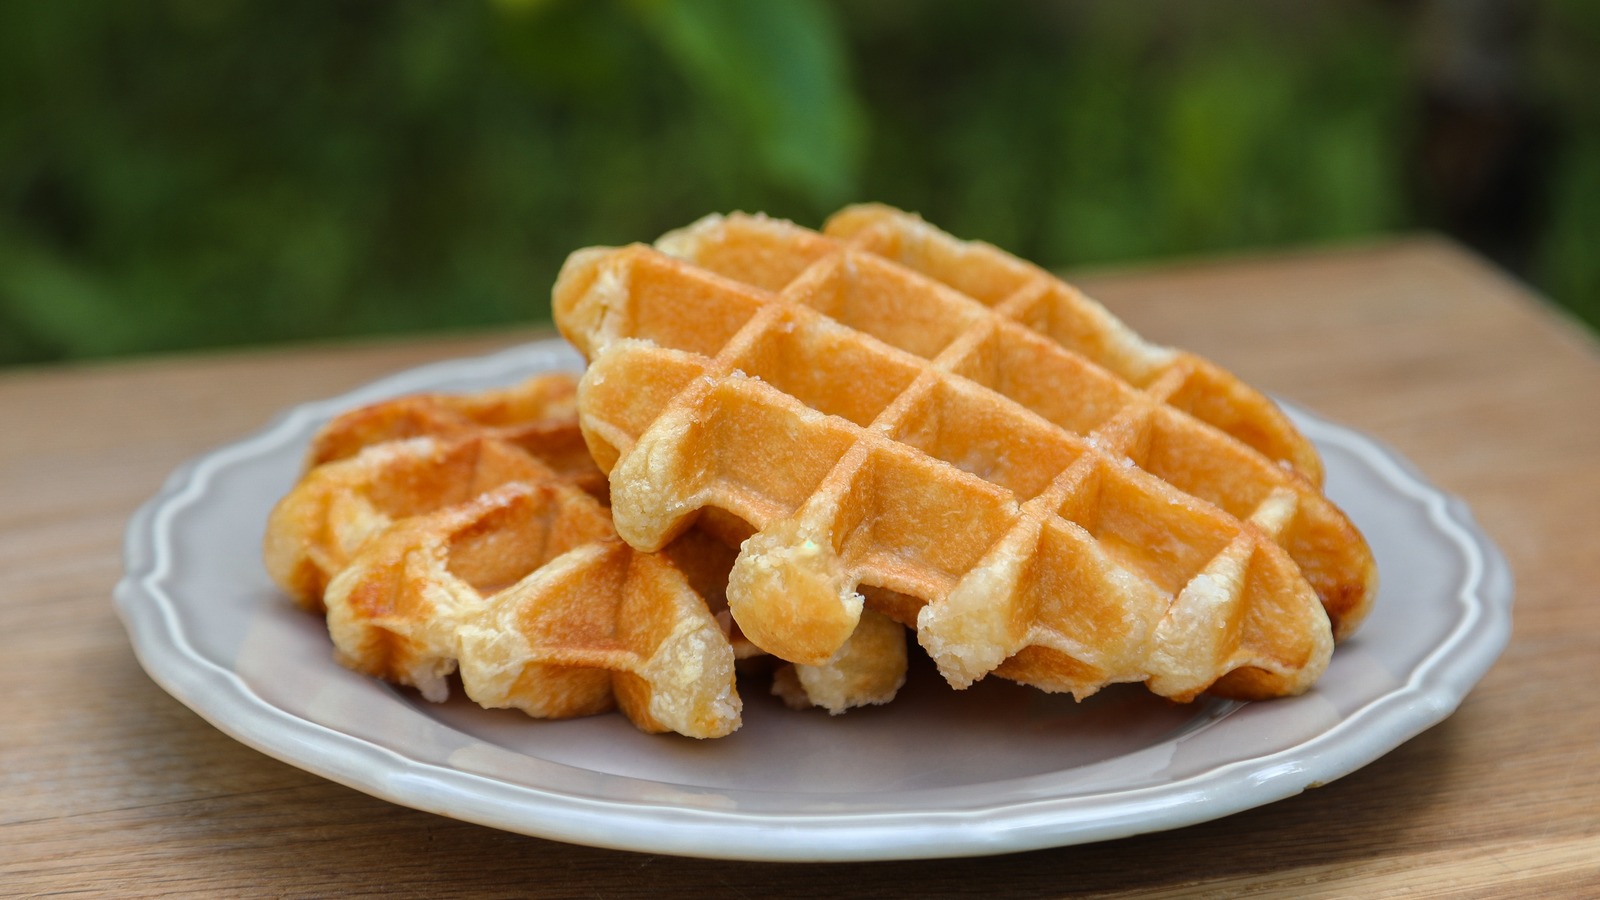 Waffles are deeply rooted in American history